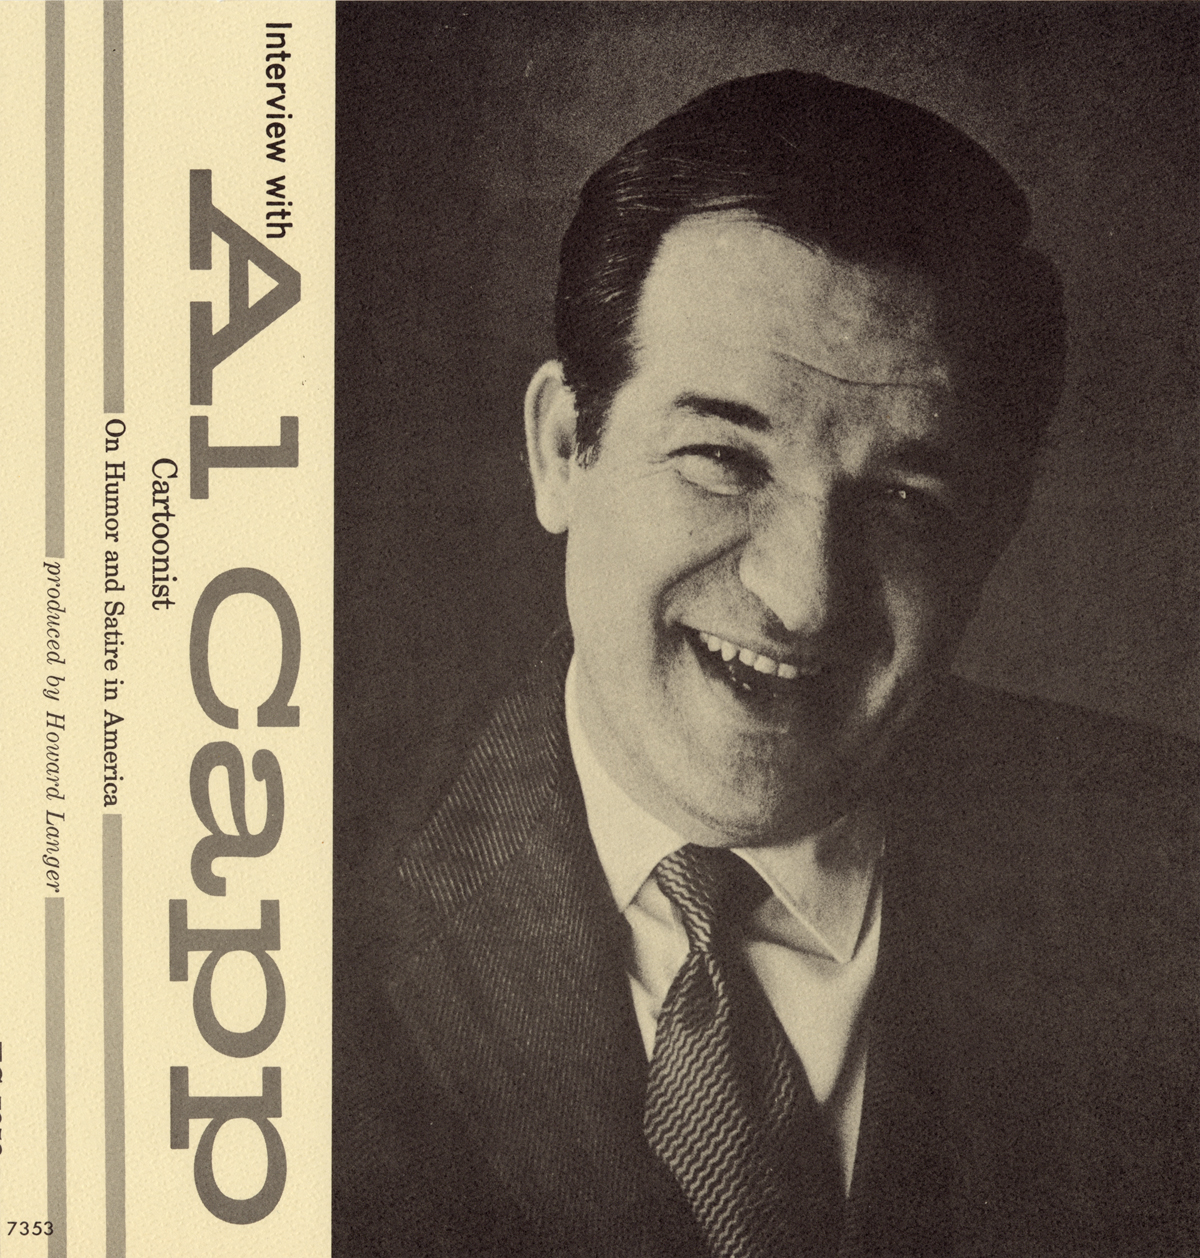 AN INTERVIEW WITH AL CAPP